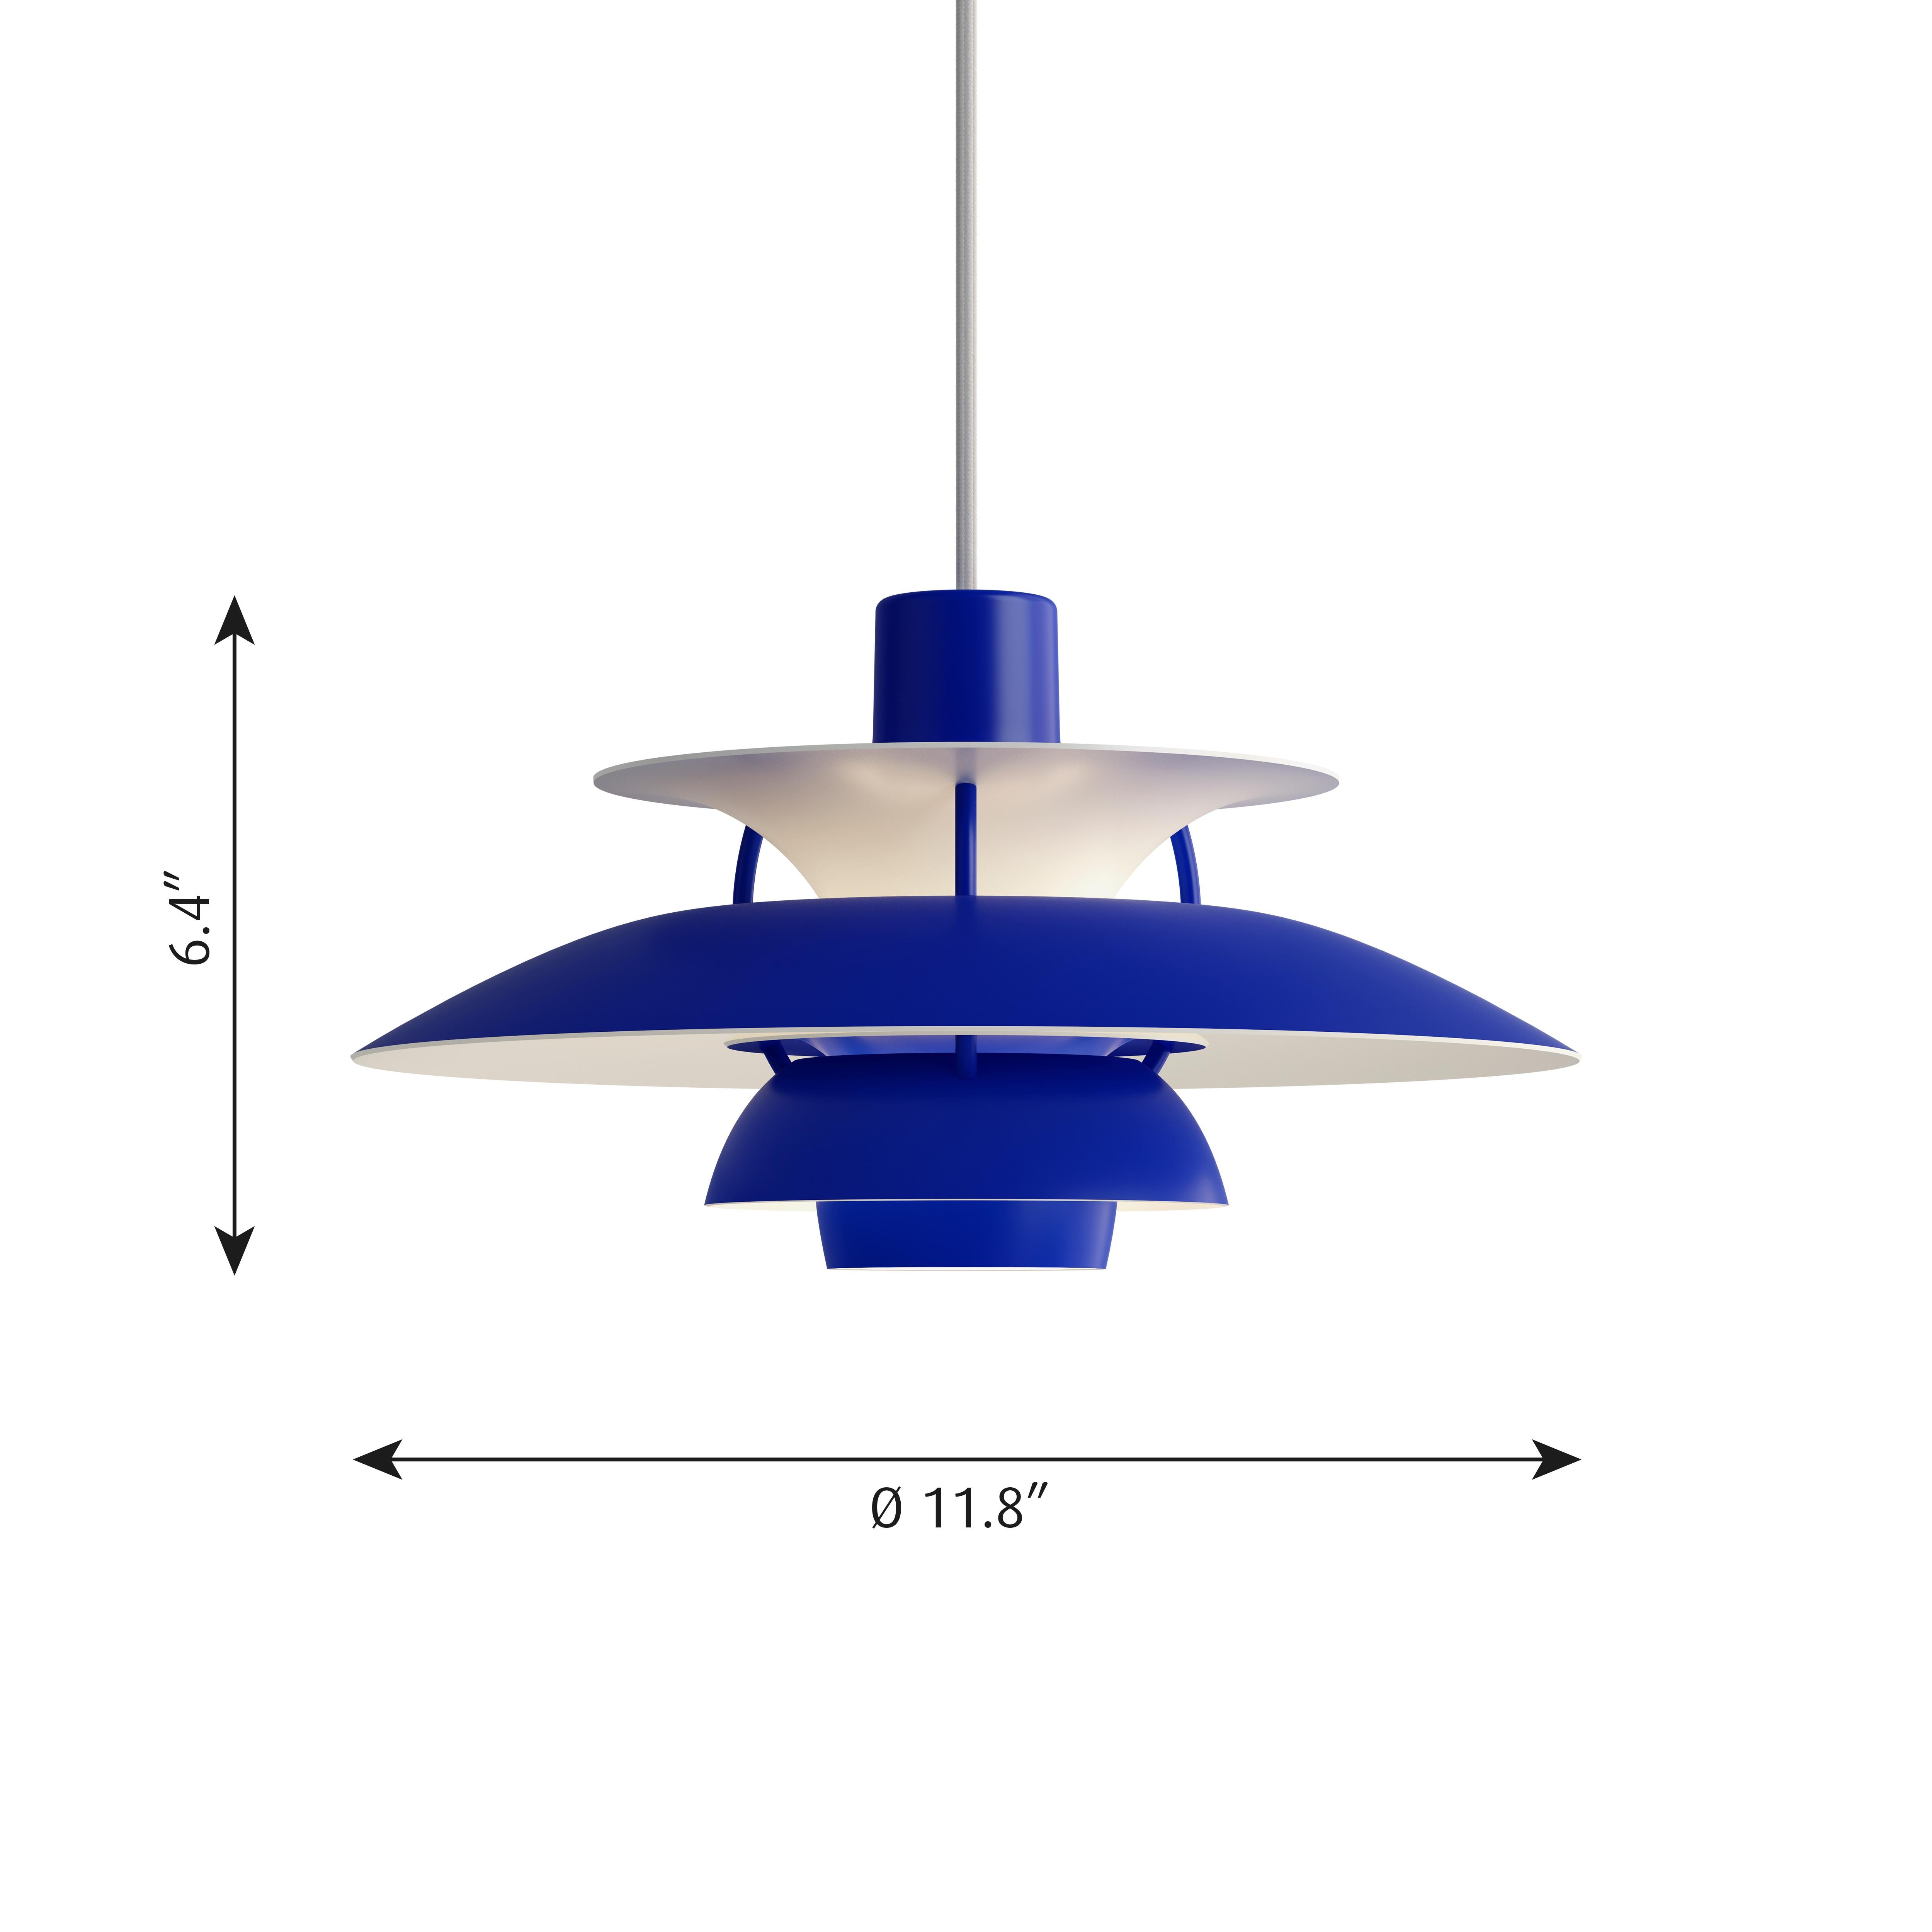 Poul Henningsen PH5 mini pendants for Louis Poulsen in all blue. Poul Henningsen originally introduced the full-sized PH 5 pendant light in 1958 as a Classic new product. No one knew at the time that it would eventually become synonymous with the PH